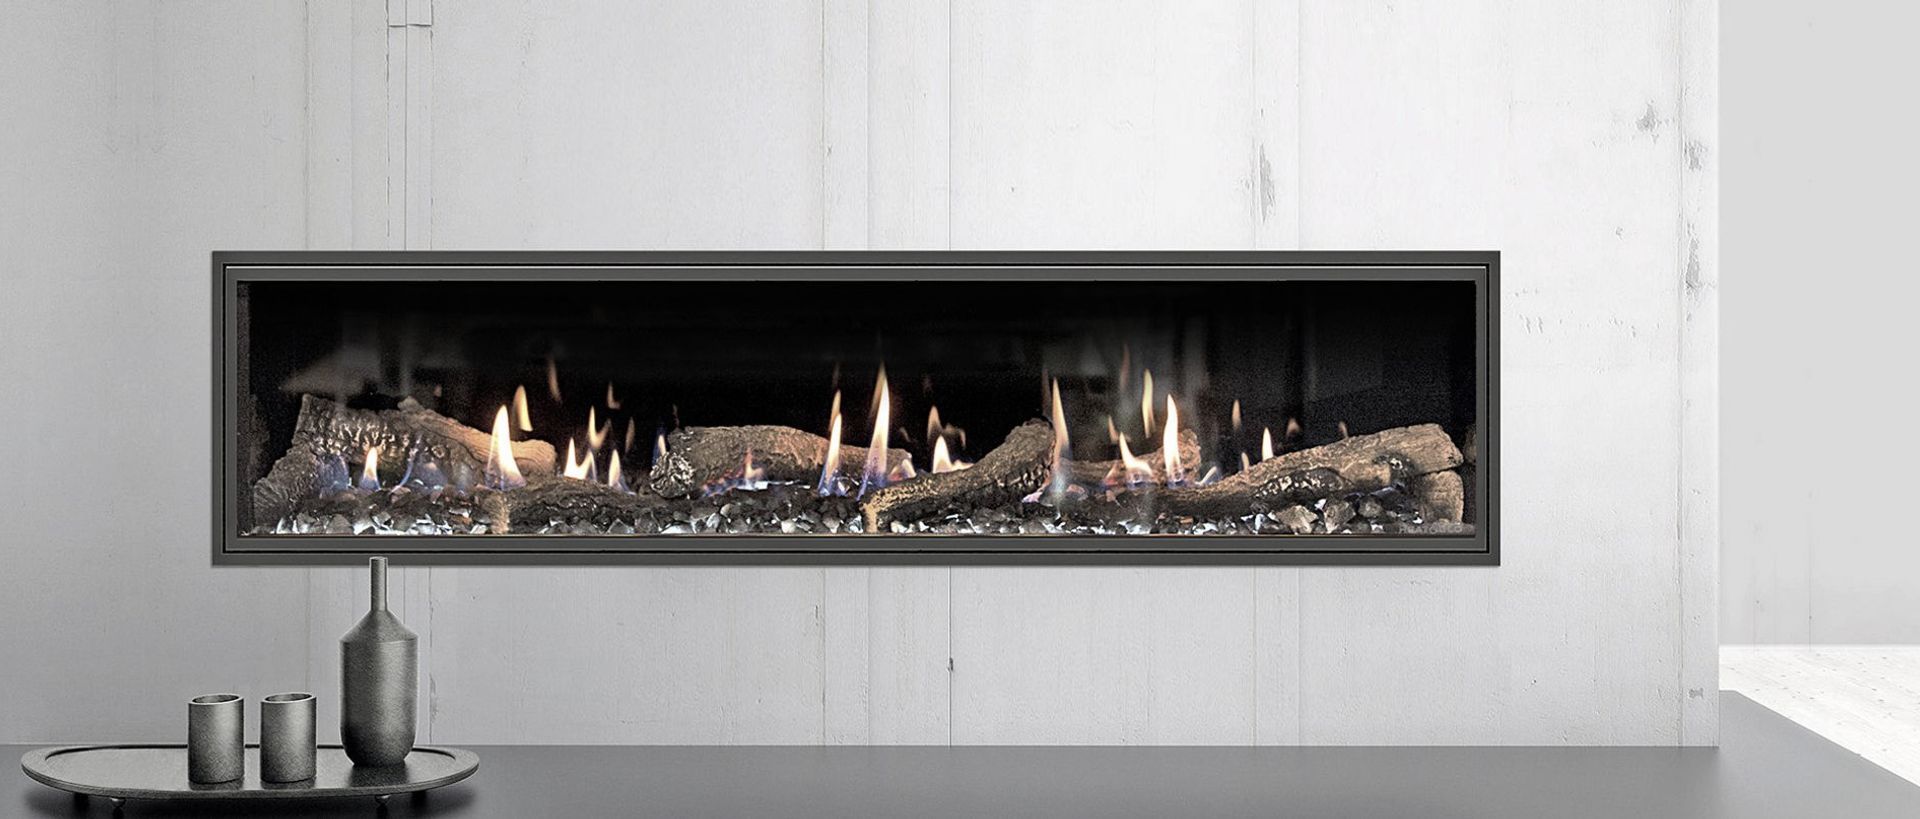 Jetmaster Fireplaces Banner image